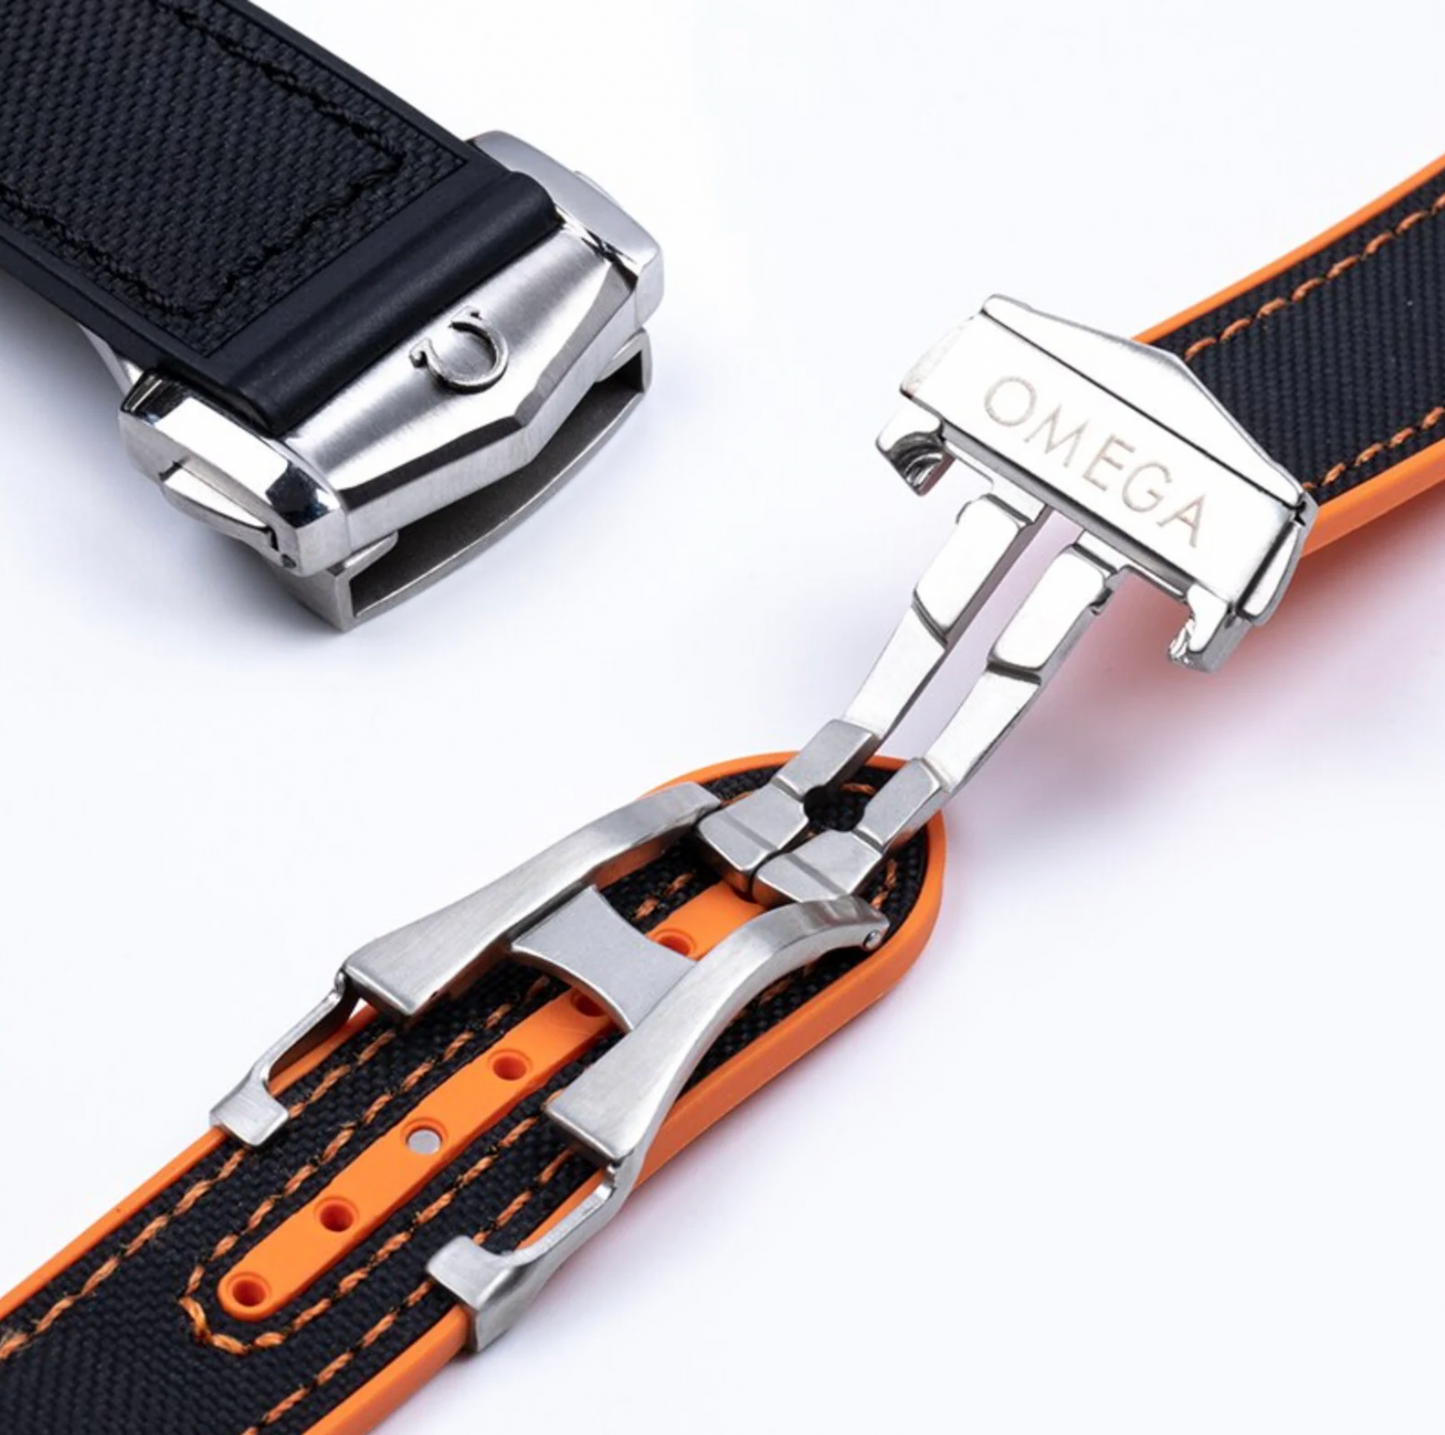 22mm/20mm Omega Nylon Strap With Omega Deployment Clasp.